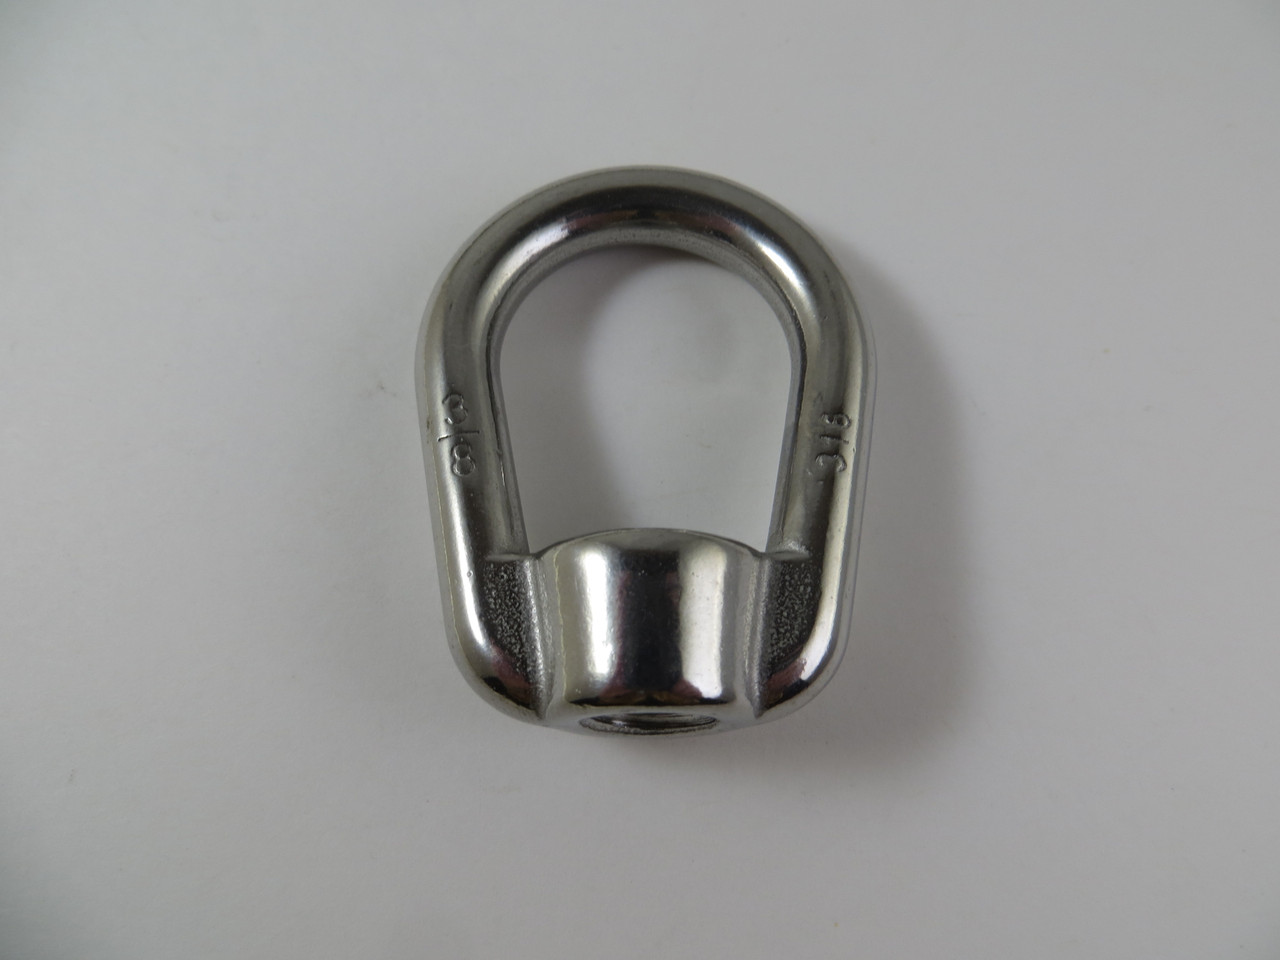 Details about   Stainless Steel 316 Type 804 US Shape Lifting Eye Nut 3/8" UNC Marine Grade 